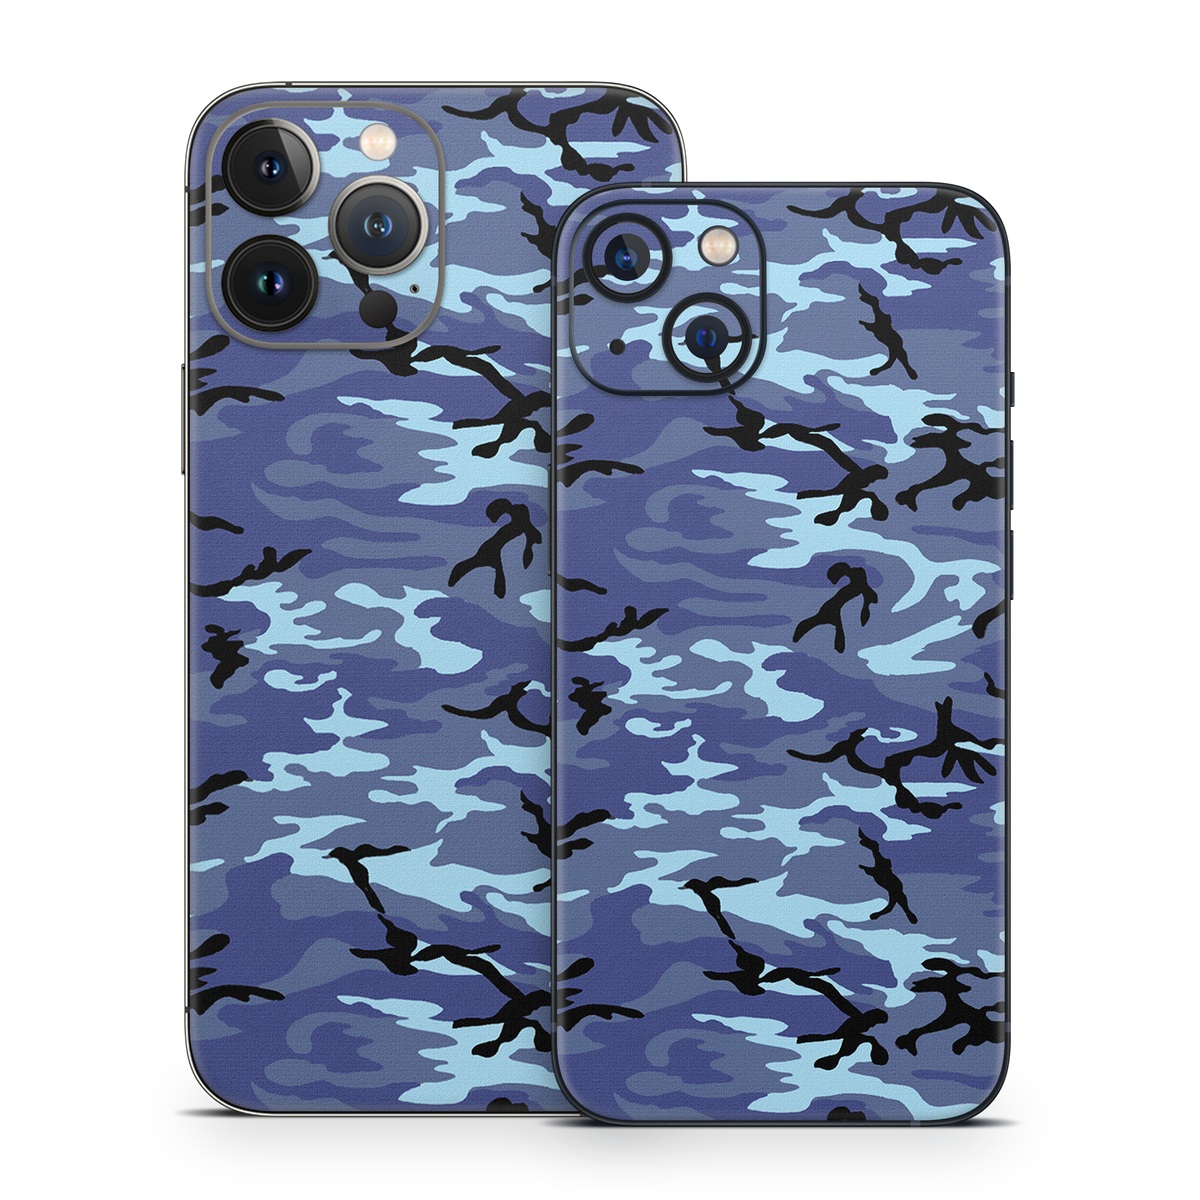 iPhone 13 Skin design of Military camouflage, Pattern, Blue, Aqua, Teal, Design, Camouflage, Textile, Uniform with blue, black, gray, purple colors